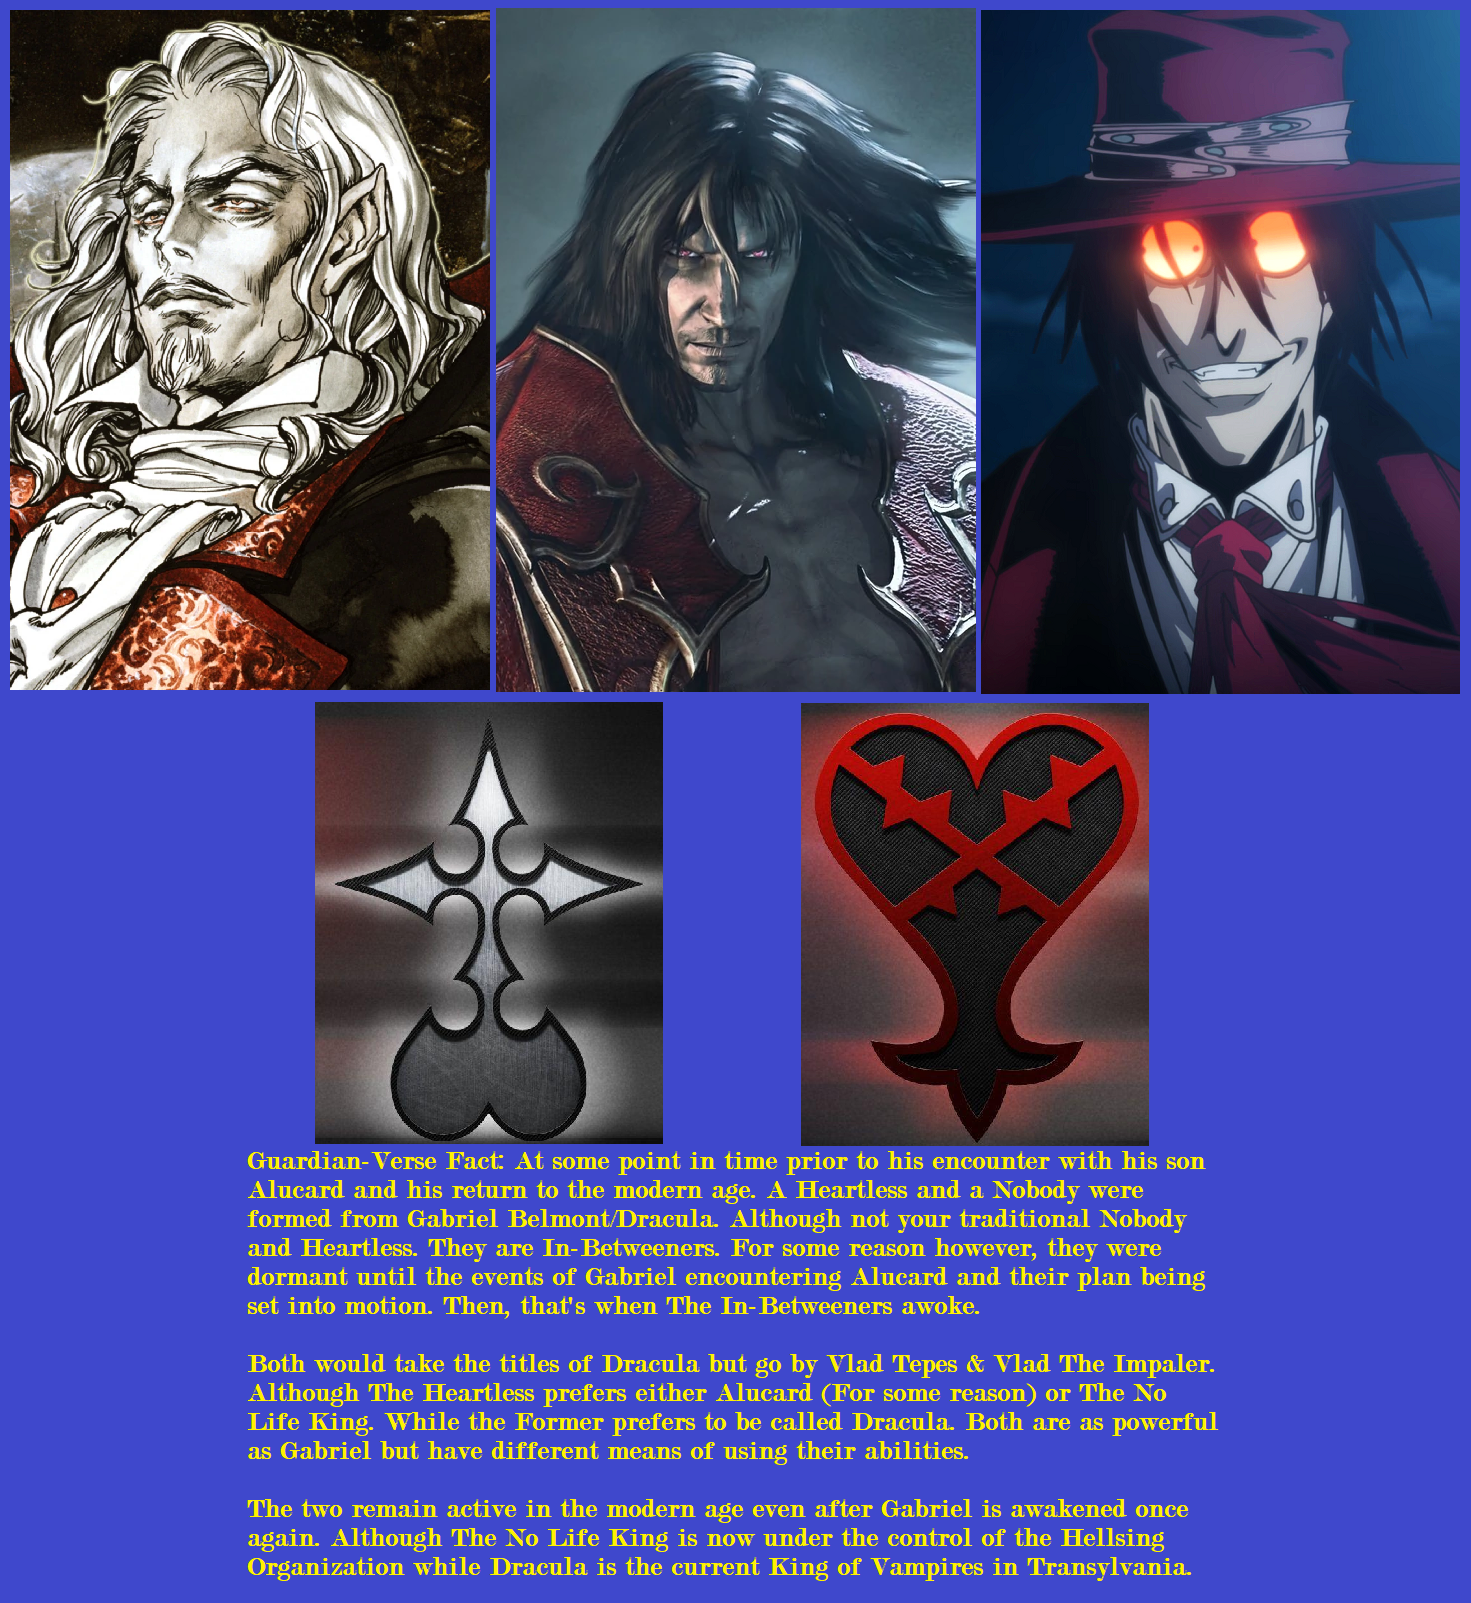 Hellsing: Alucard's Loyalty and Pride Make Him the Ideal Overpowered  Protagonist